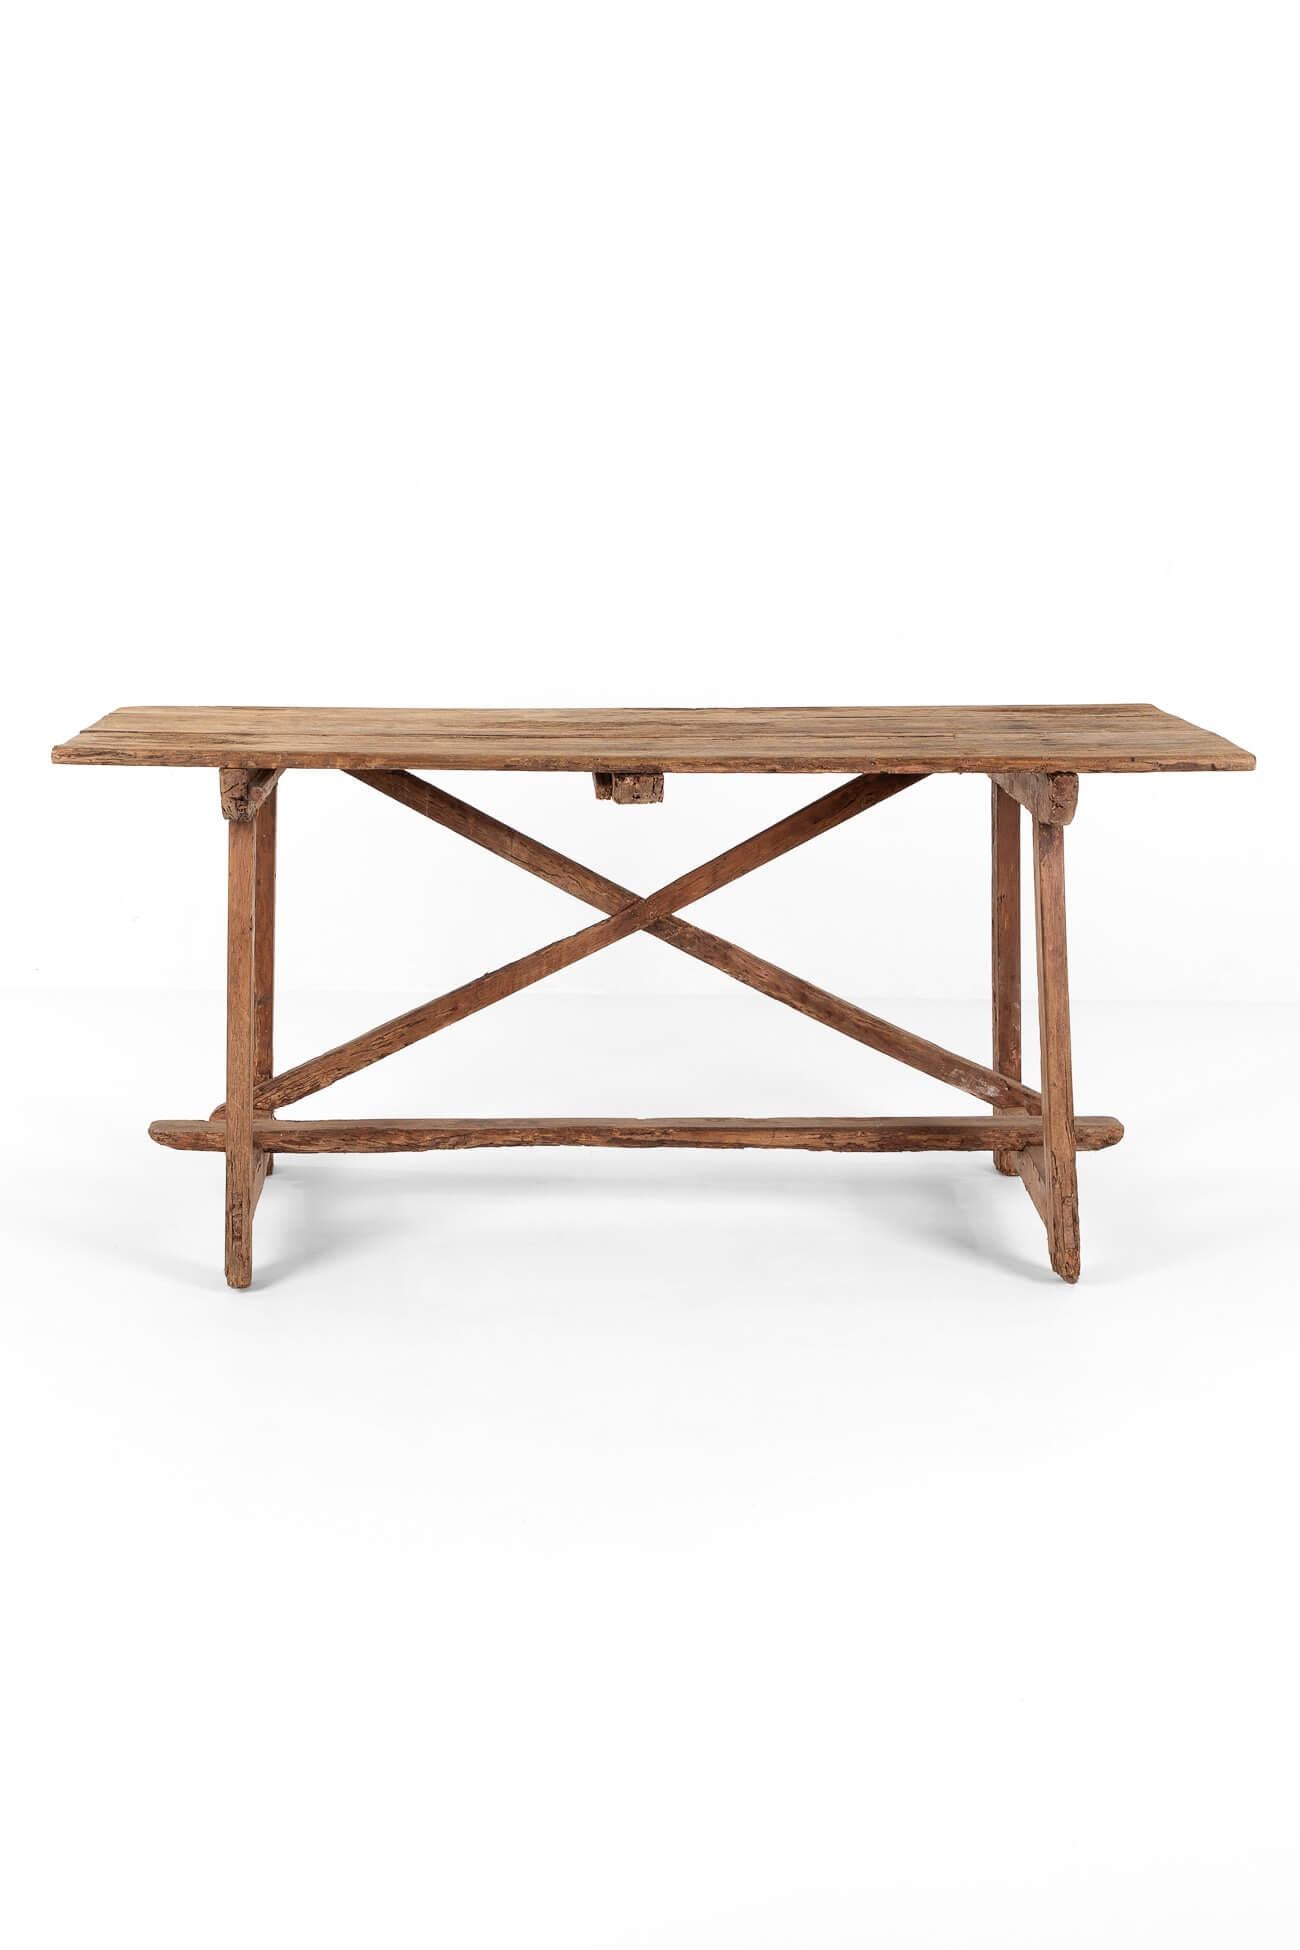 A superb 18th-century rustic walnut table from Catalonia.

The generous weathered three-plank top is supported by an X-frame support to one side of the table and a central stretcher that overrides at each end. The top is supported by two trestle end